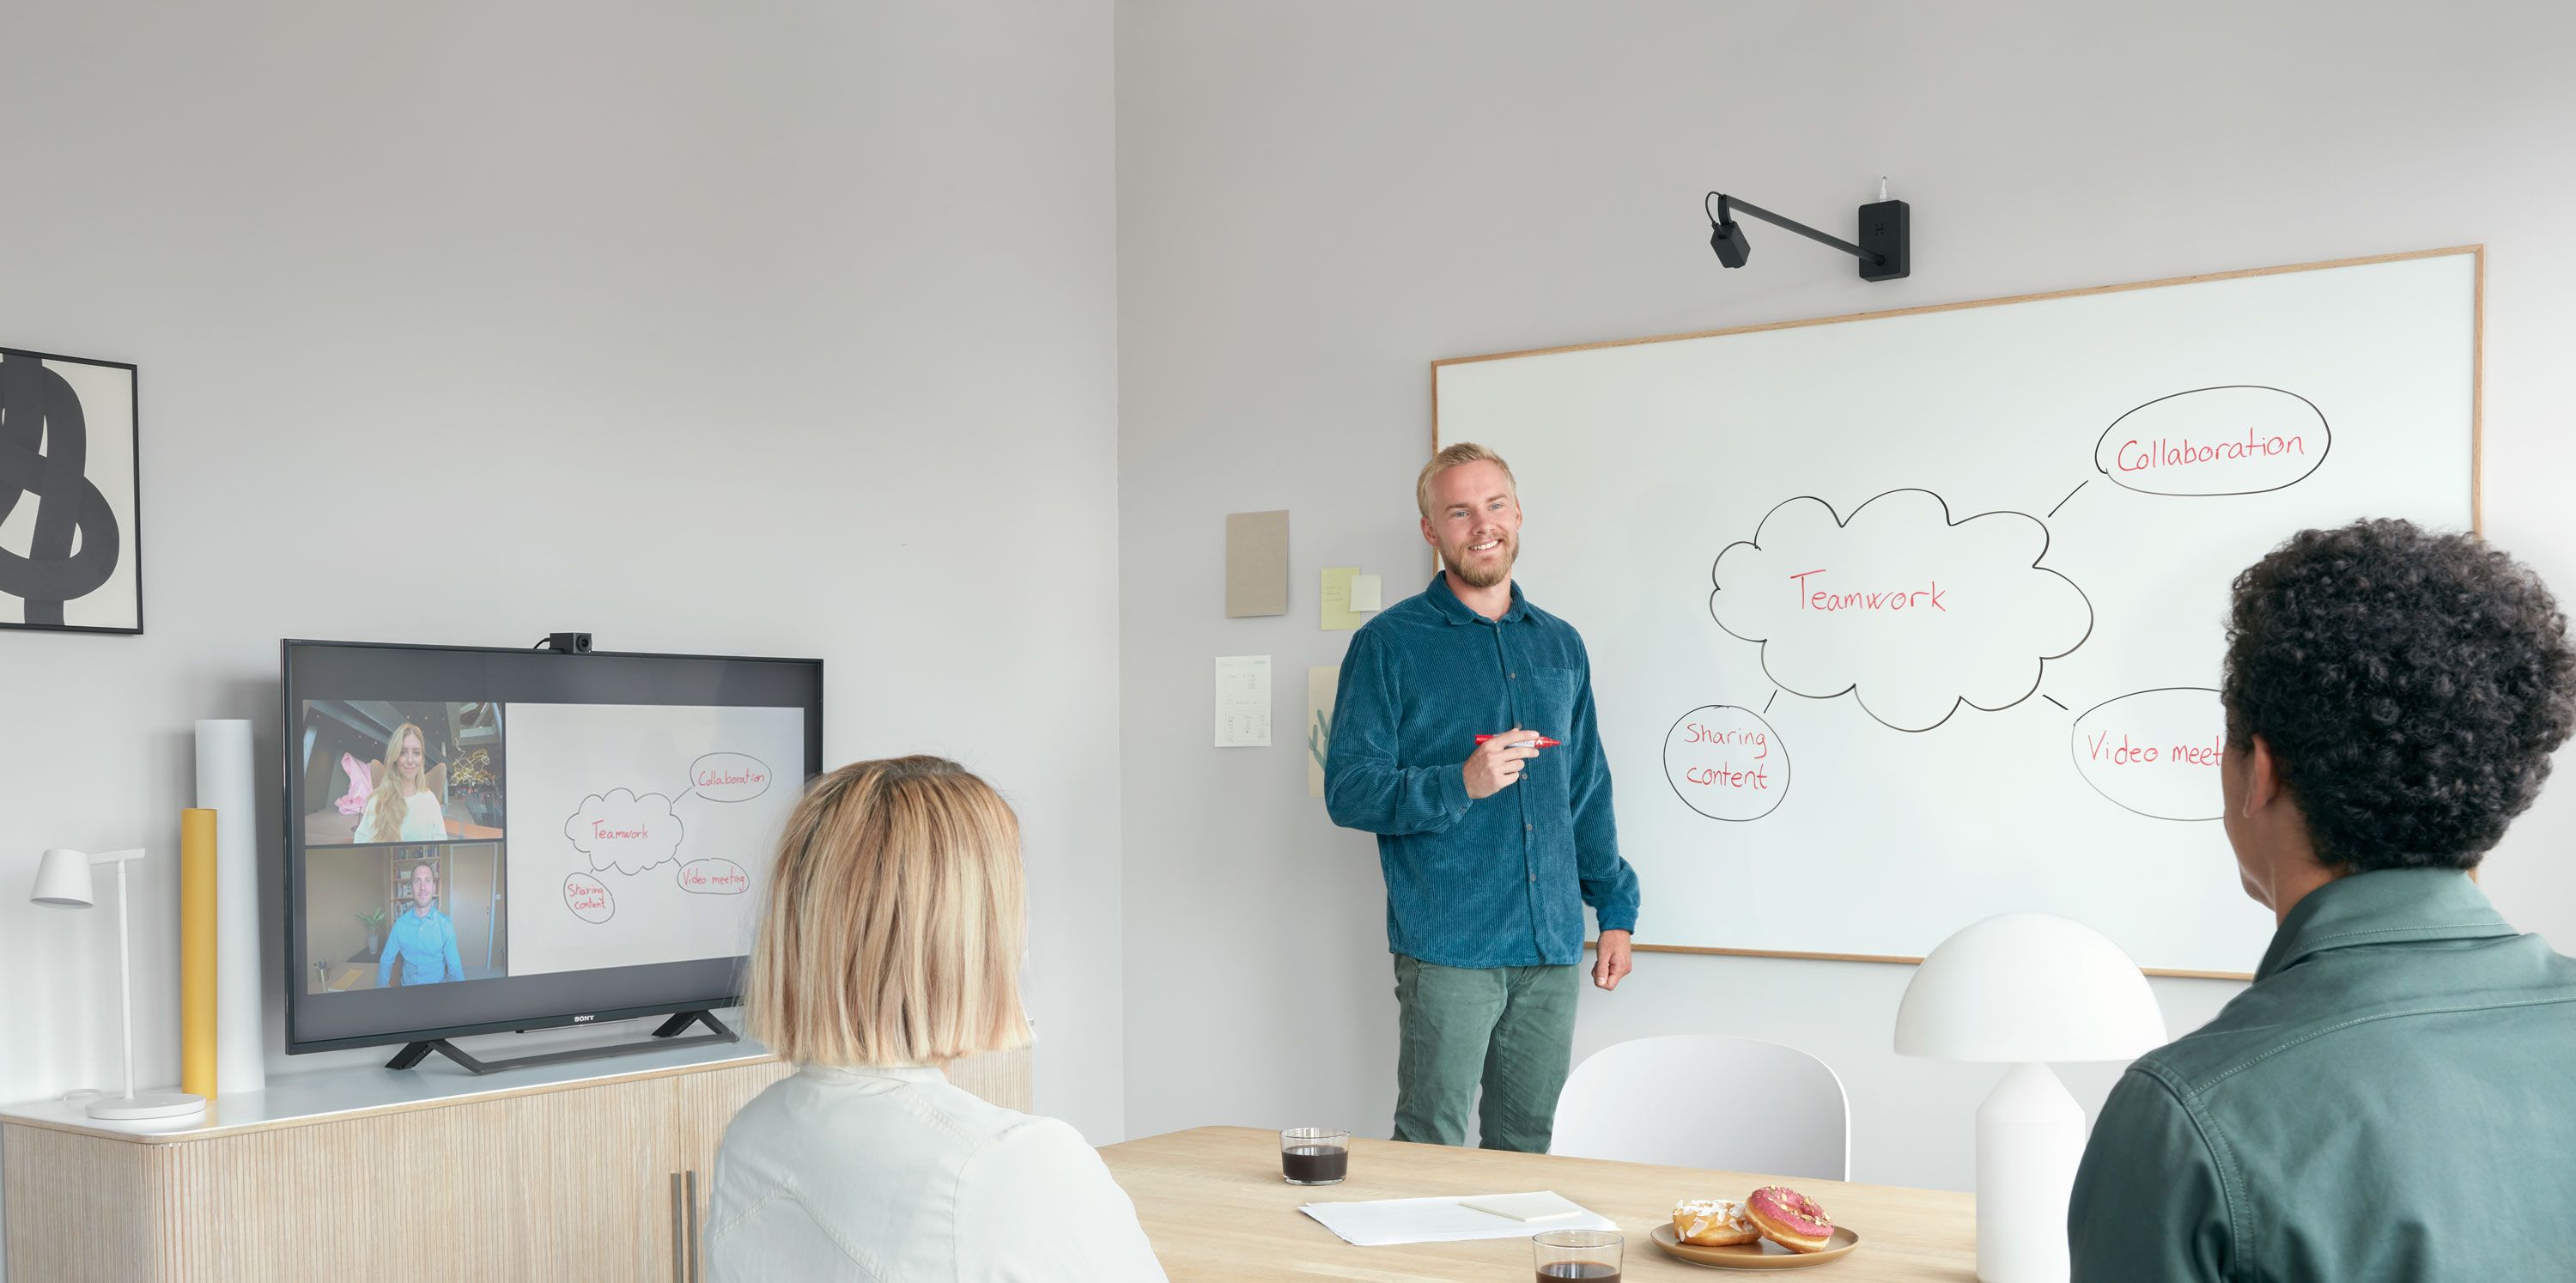 Huddly Canvas enables whiteboard collaboration for remote teams | Huddly